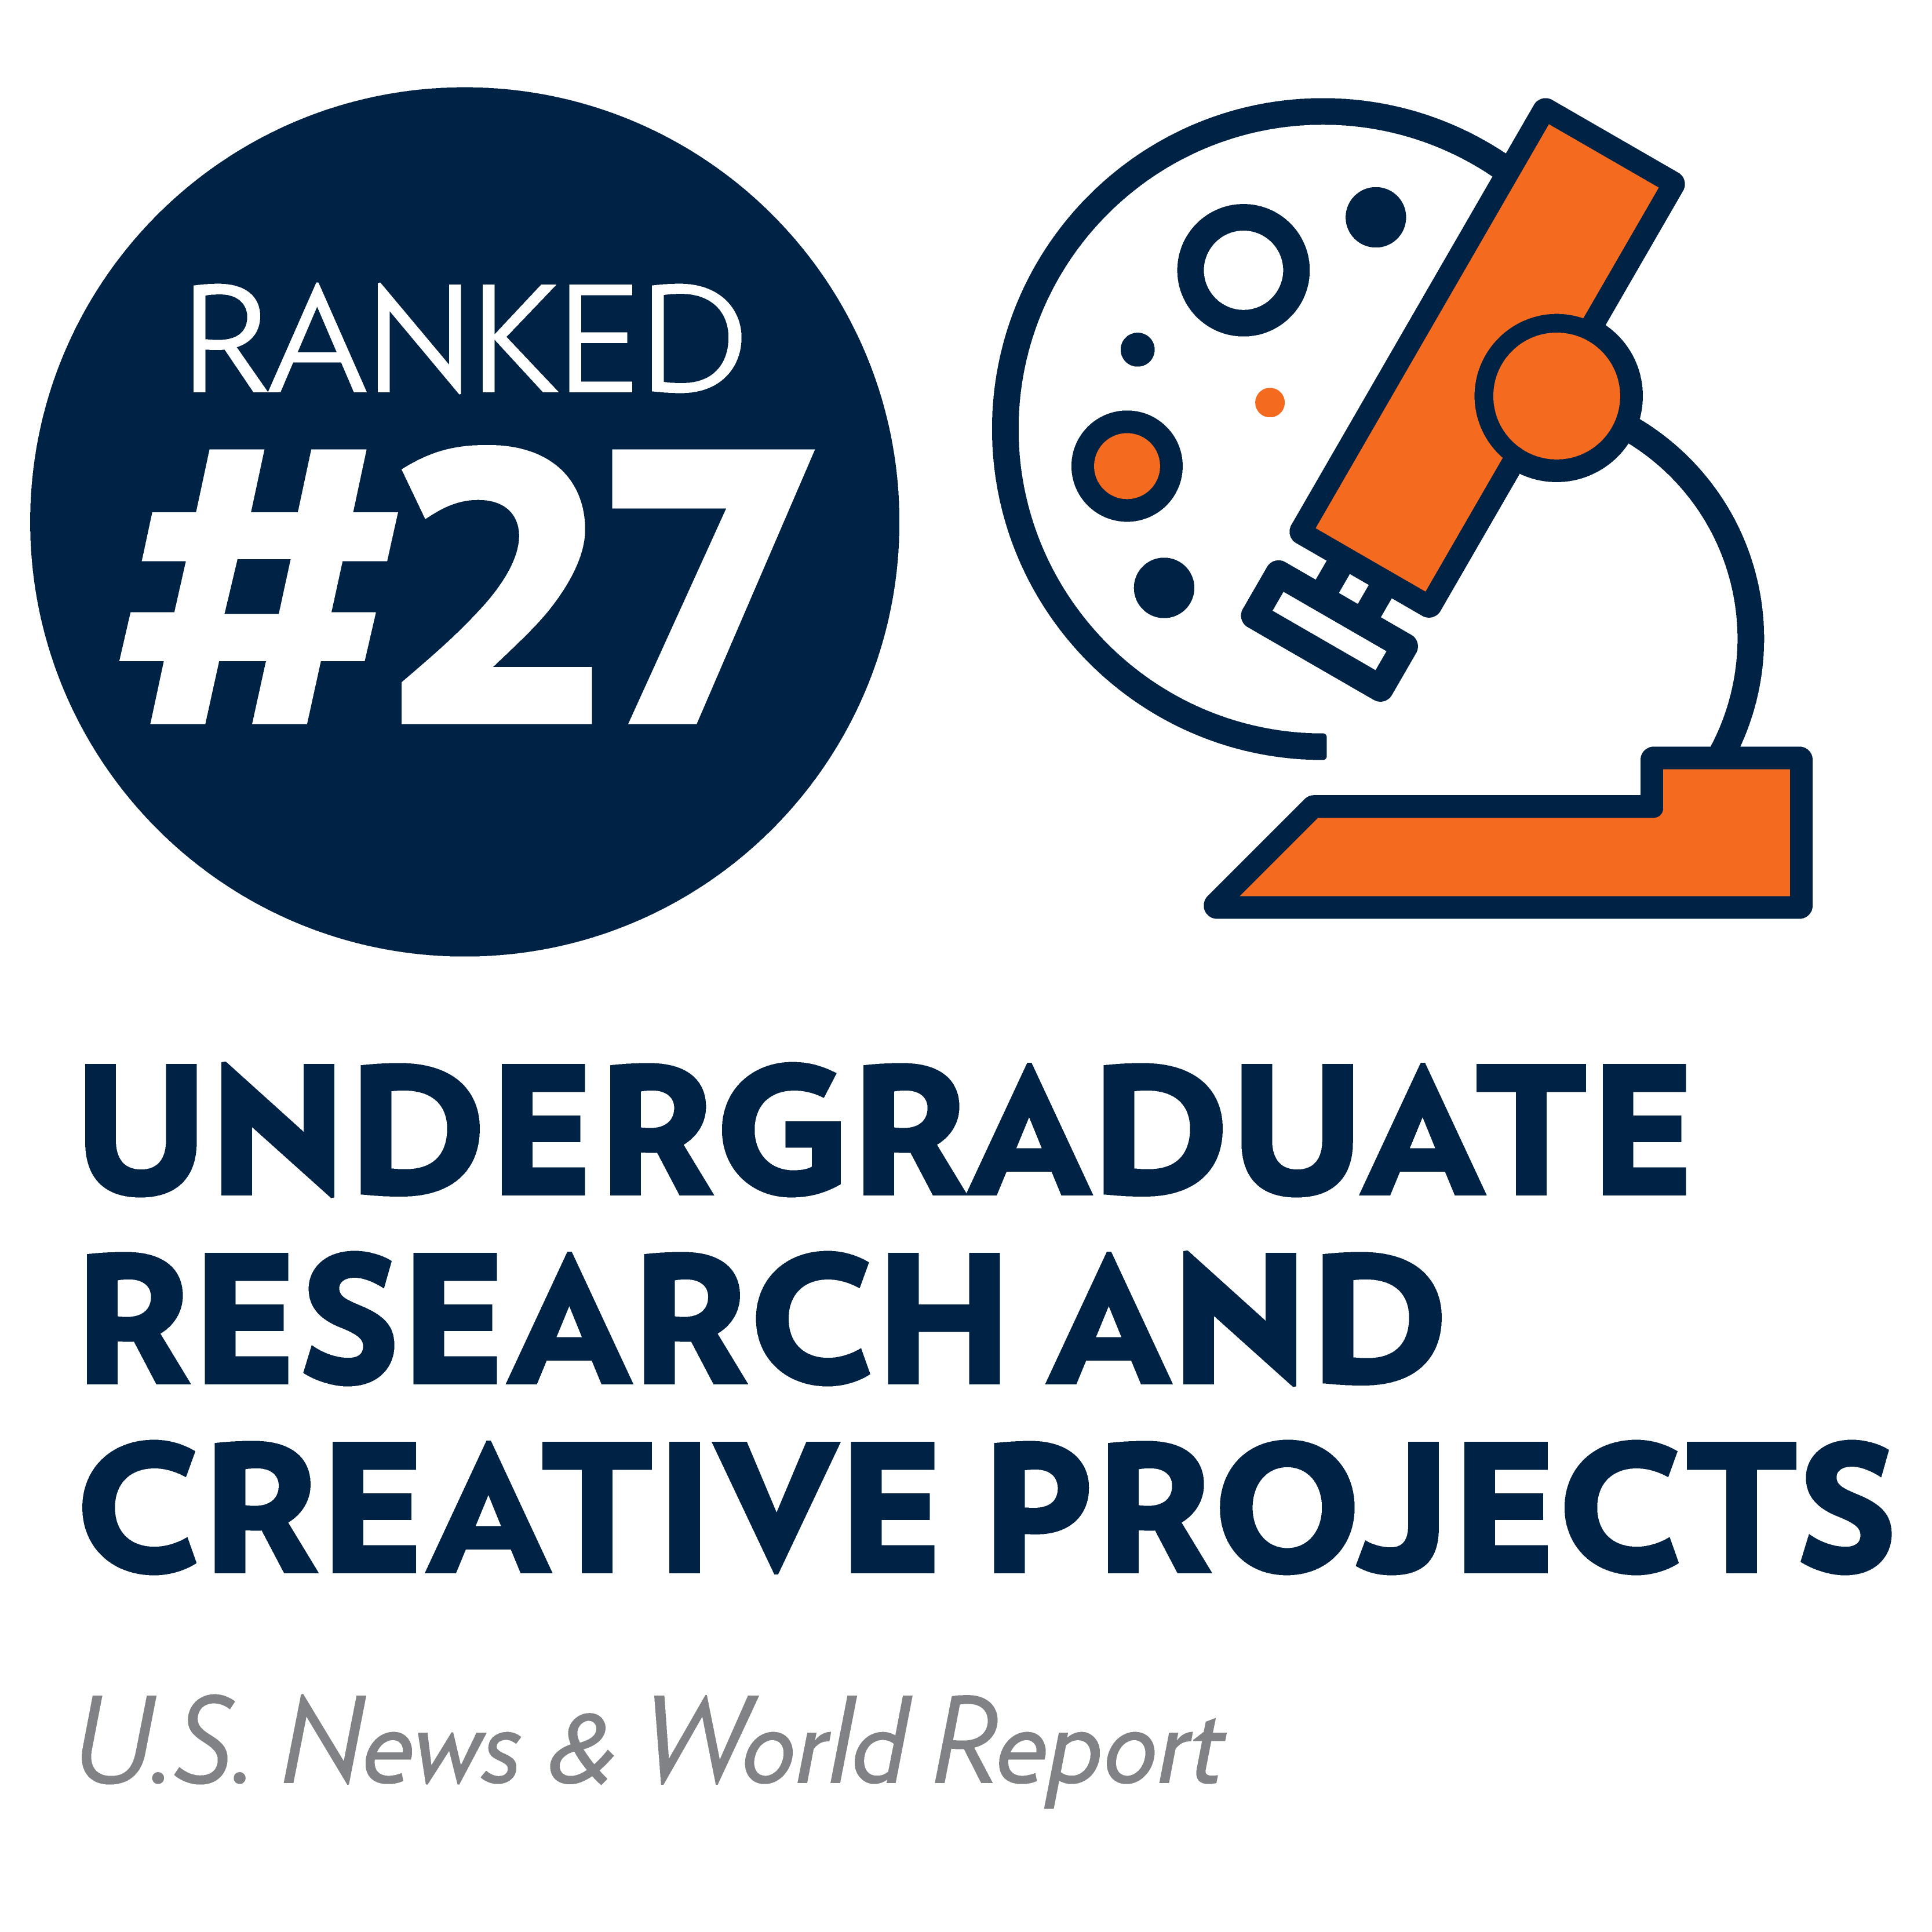 Hope is ranked 27th in research by us news & world report